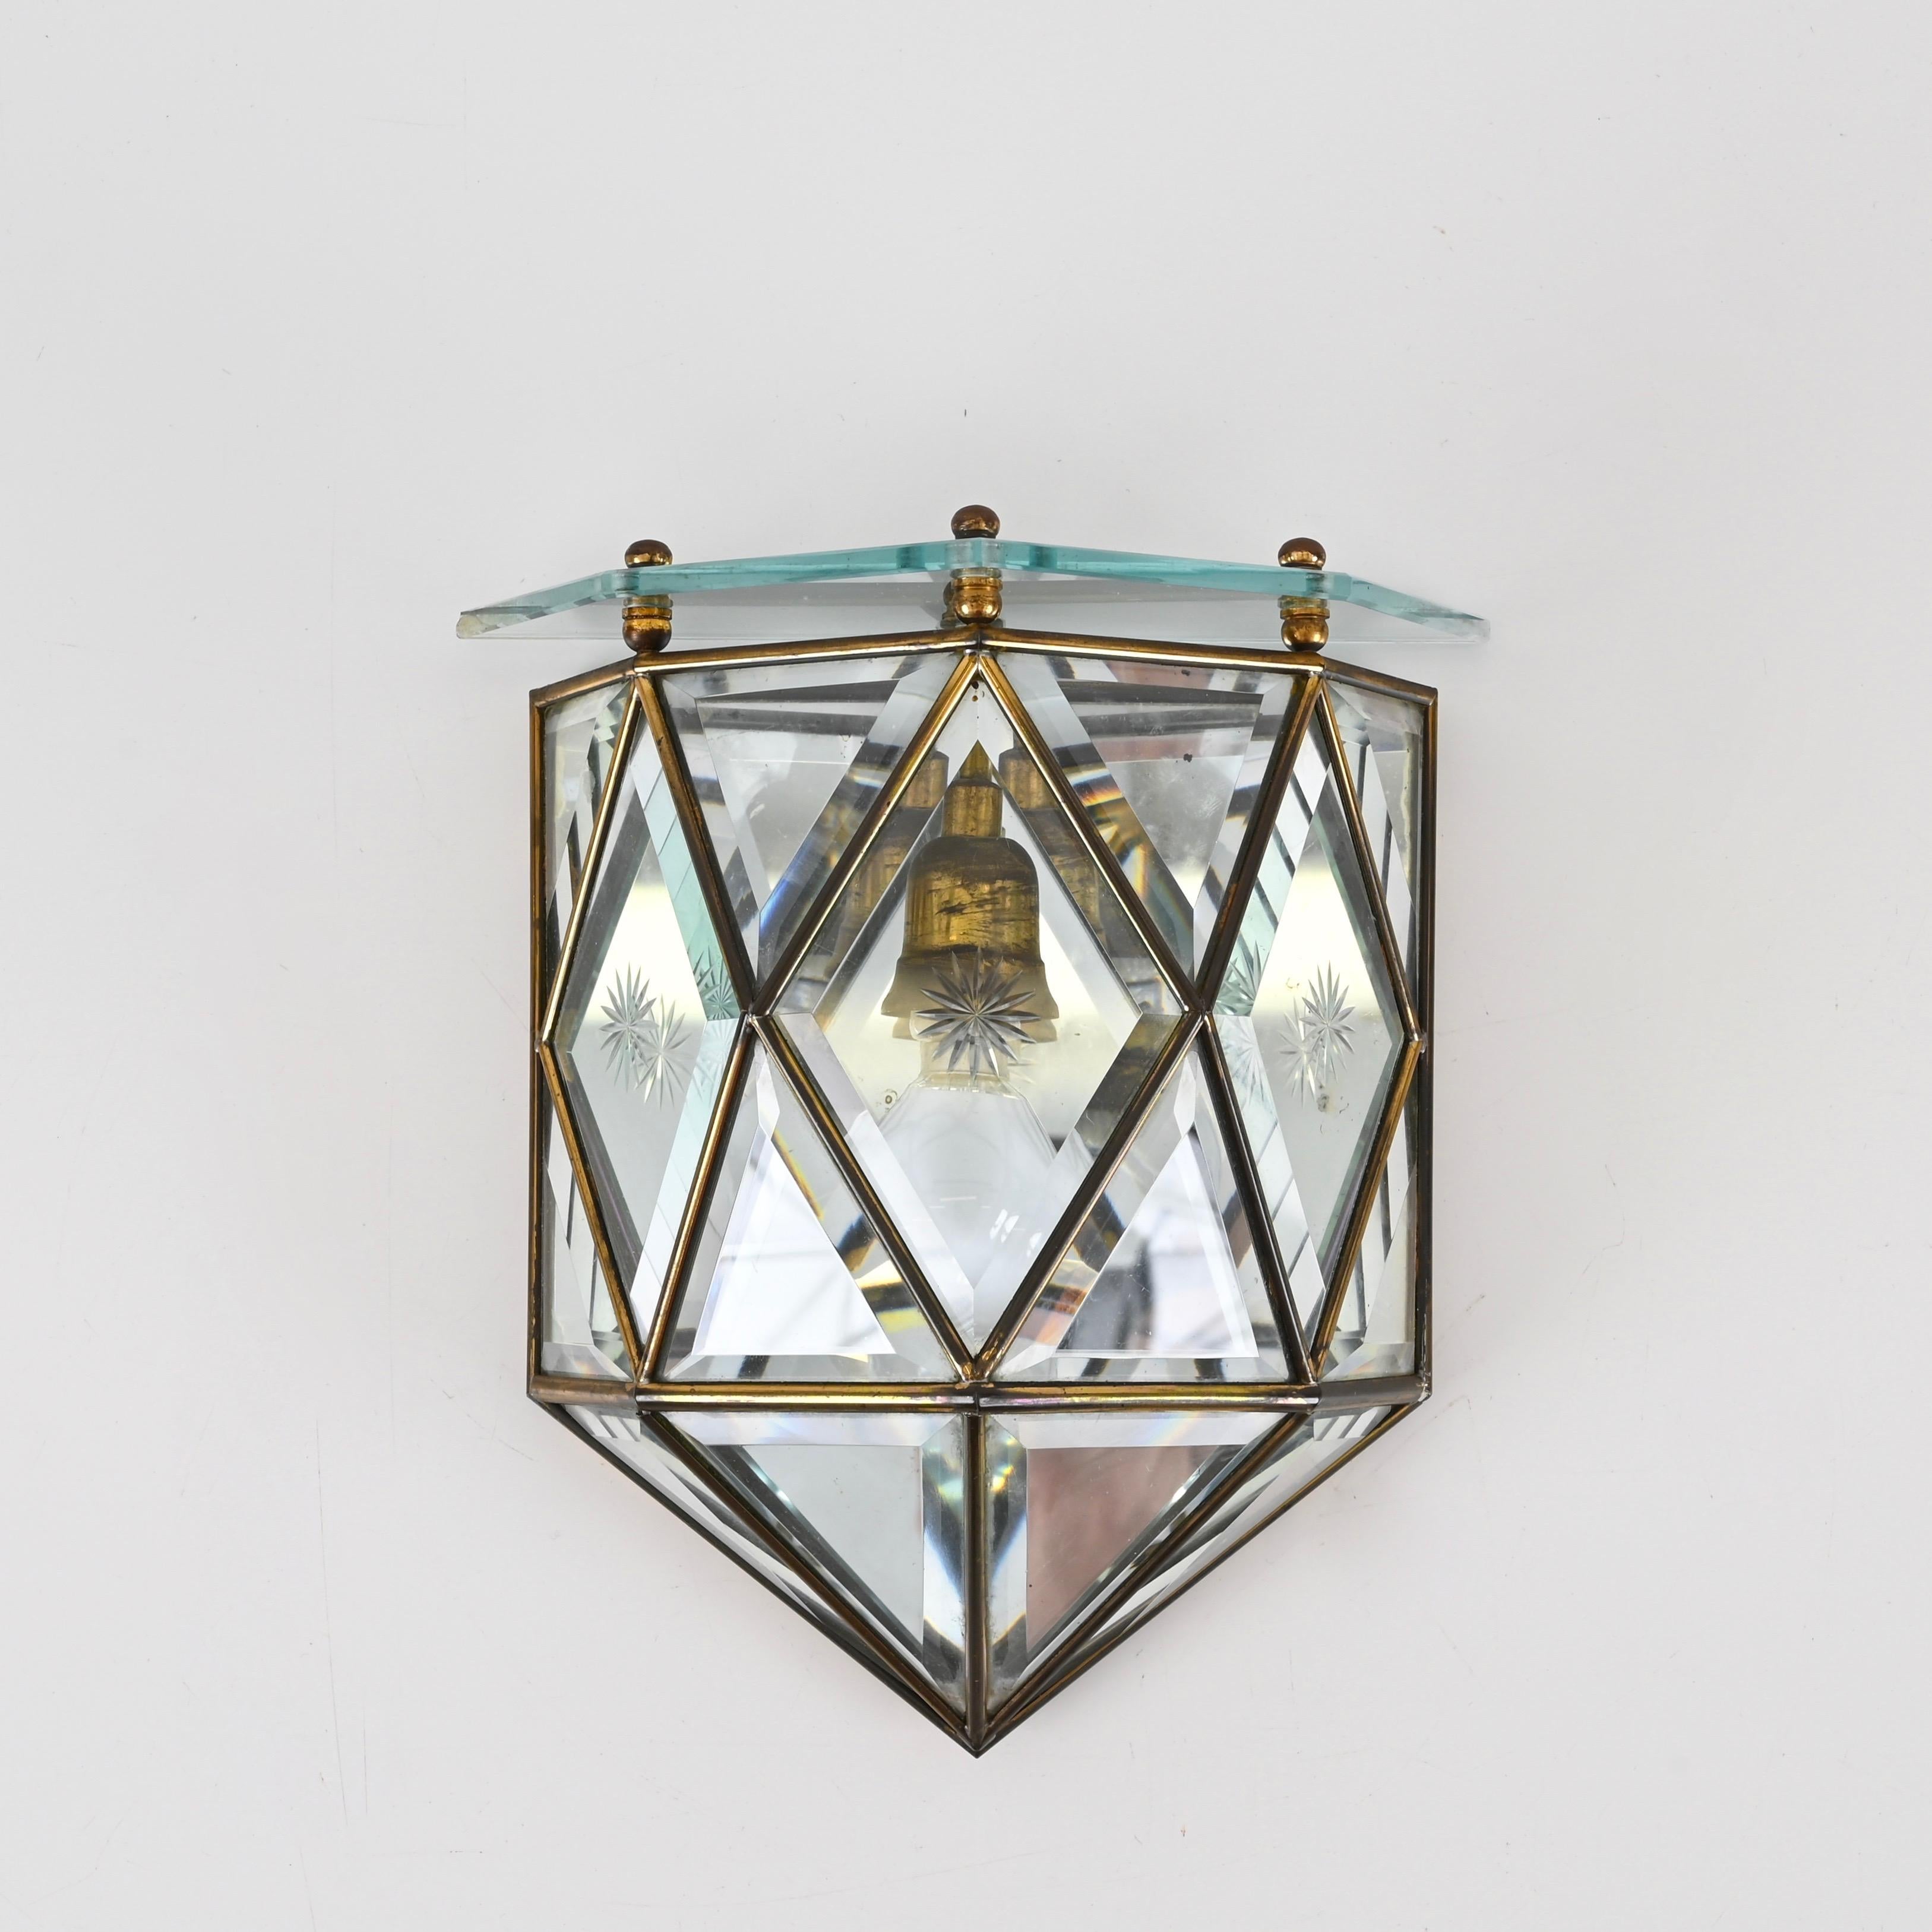 Fontana Arte Pair of Sconces in Beveled Glass, Brass and Mirror, Italy, 1940s For Sale 11